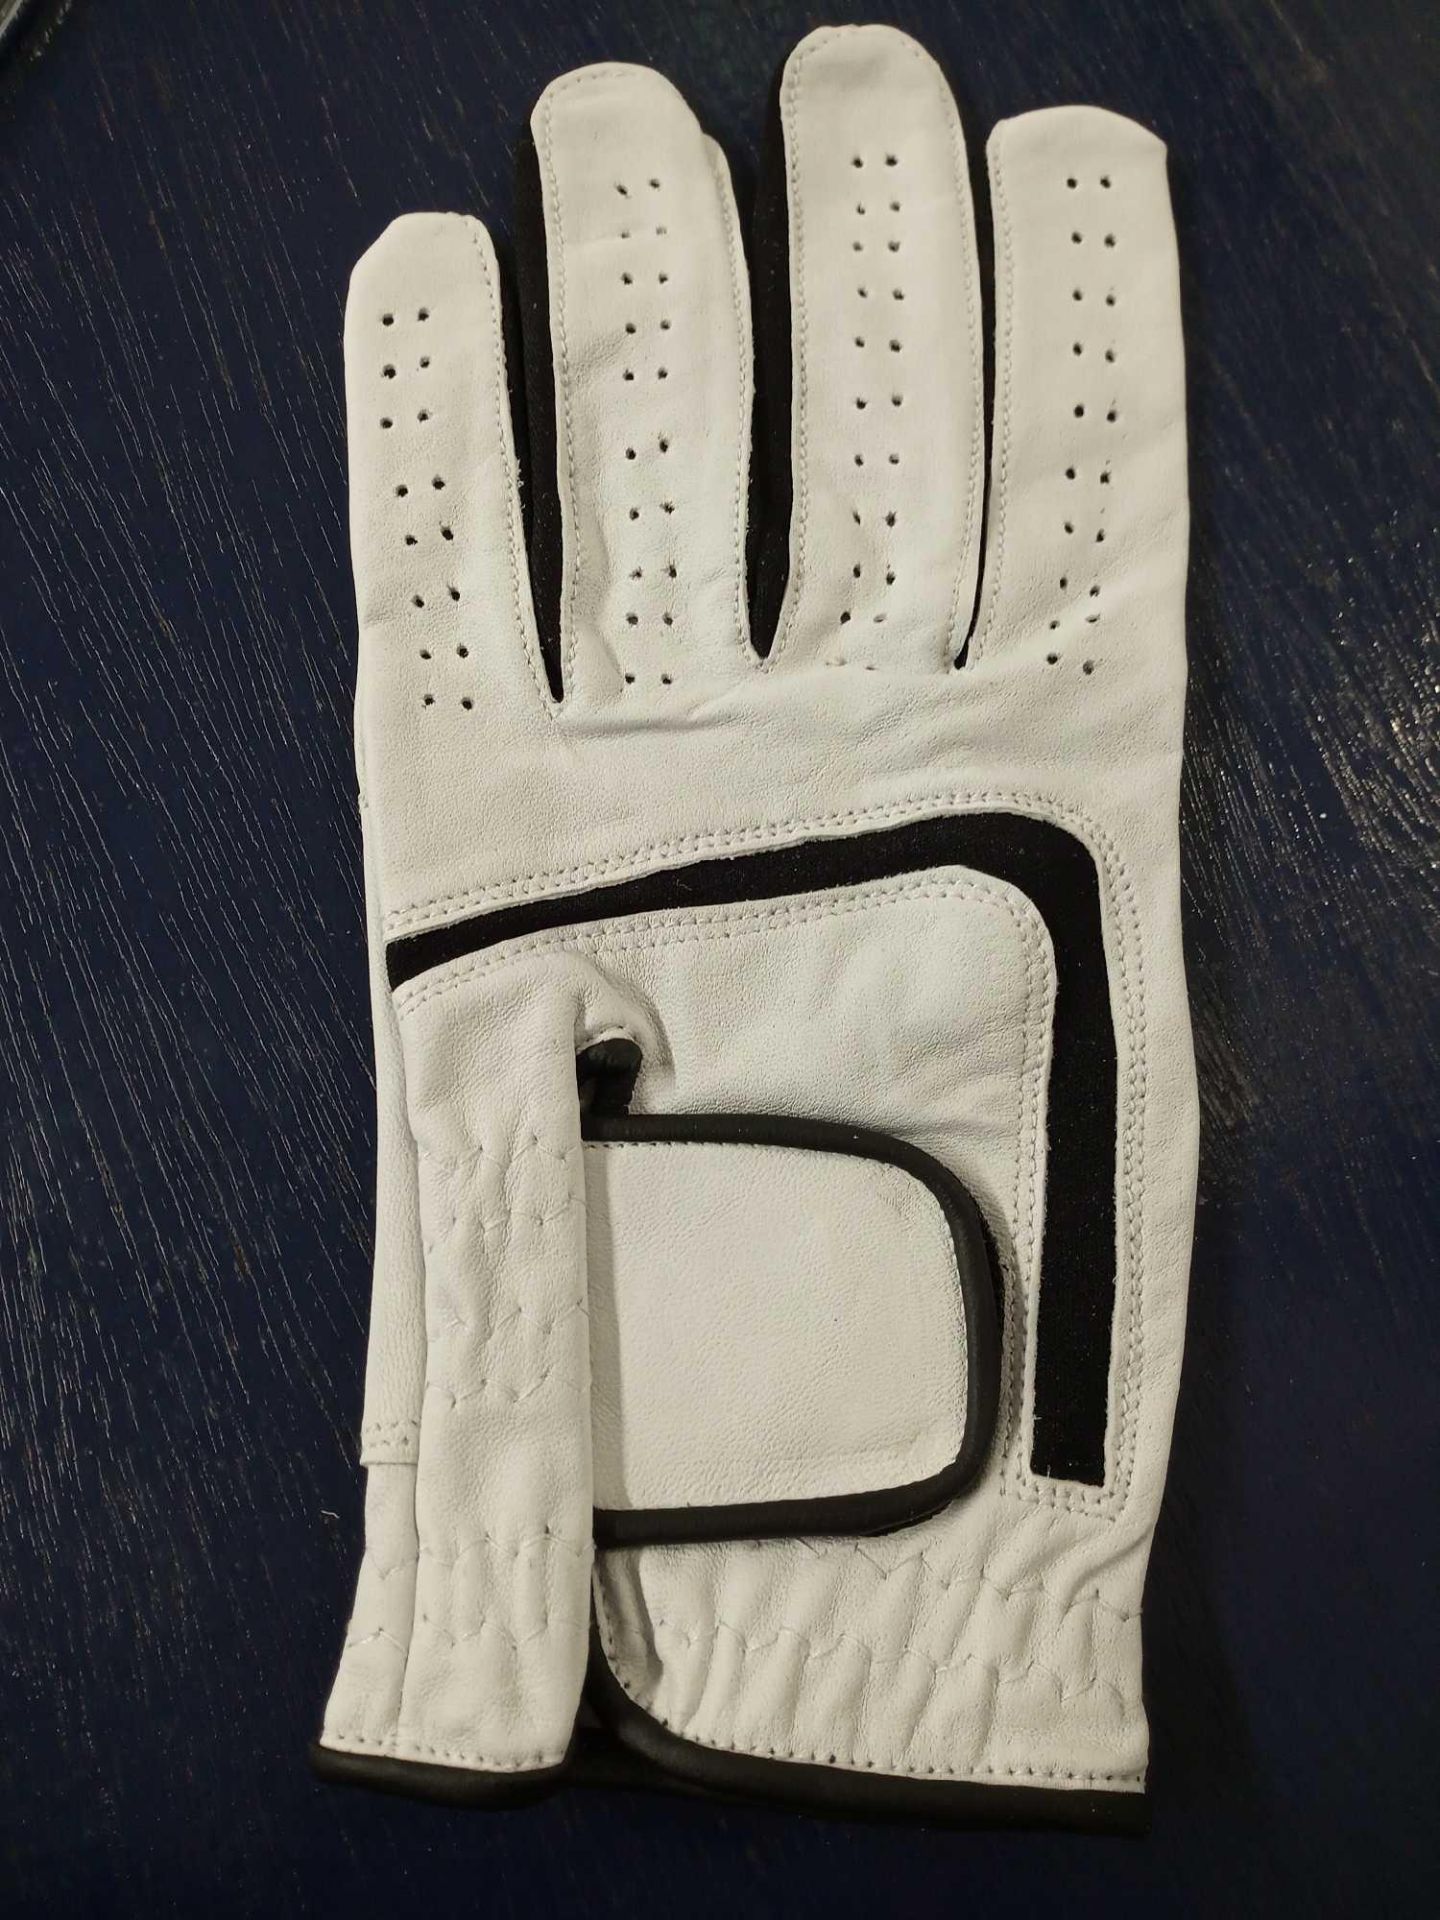 Leather White & Black Golf Glove Medium/Large(Appraisals Available Upon Request) (Pictures Are For I - Image 2 of 2